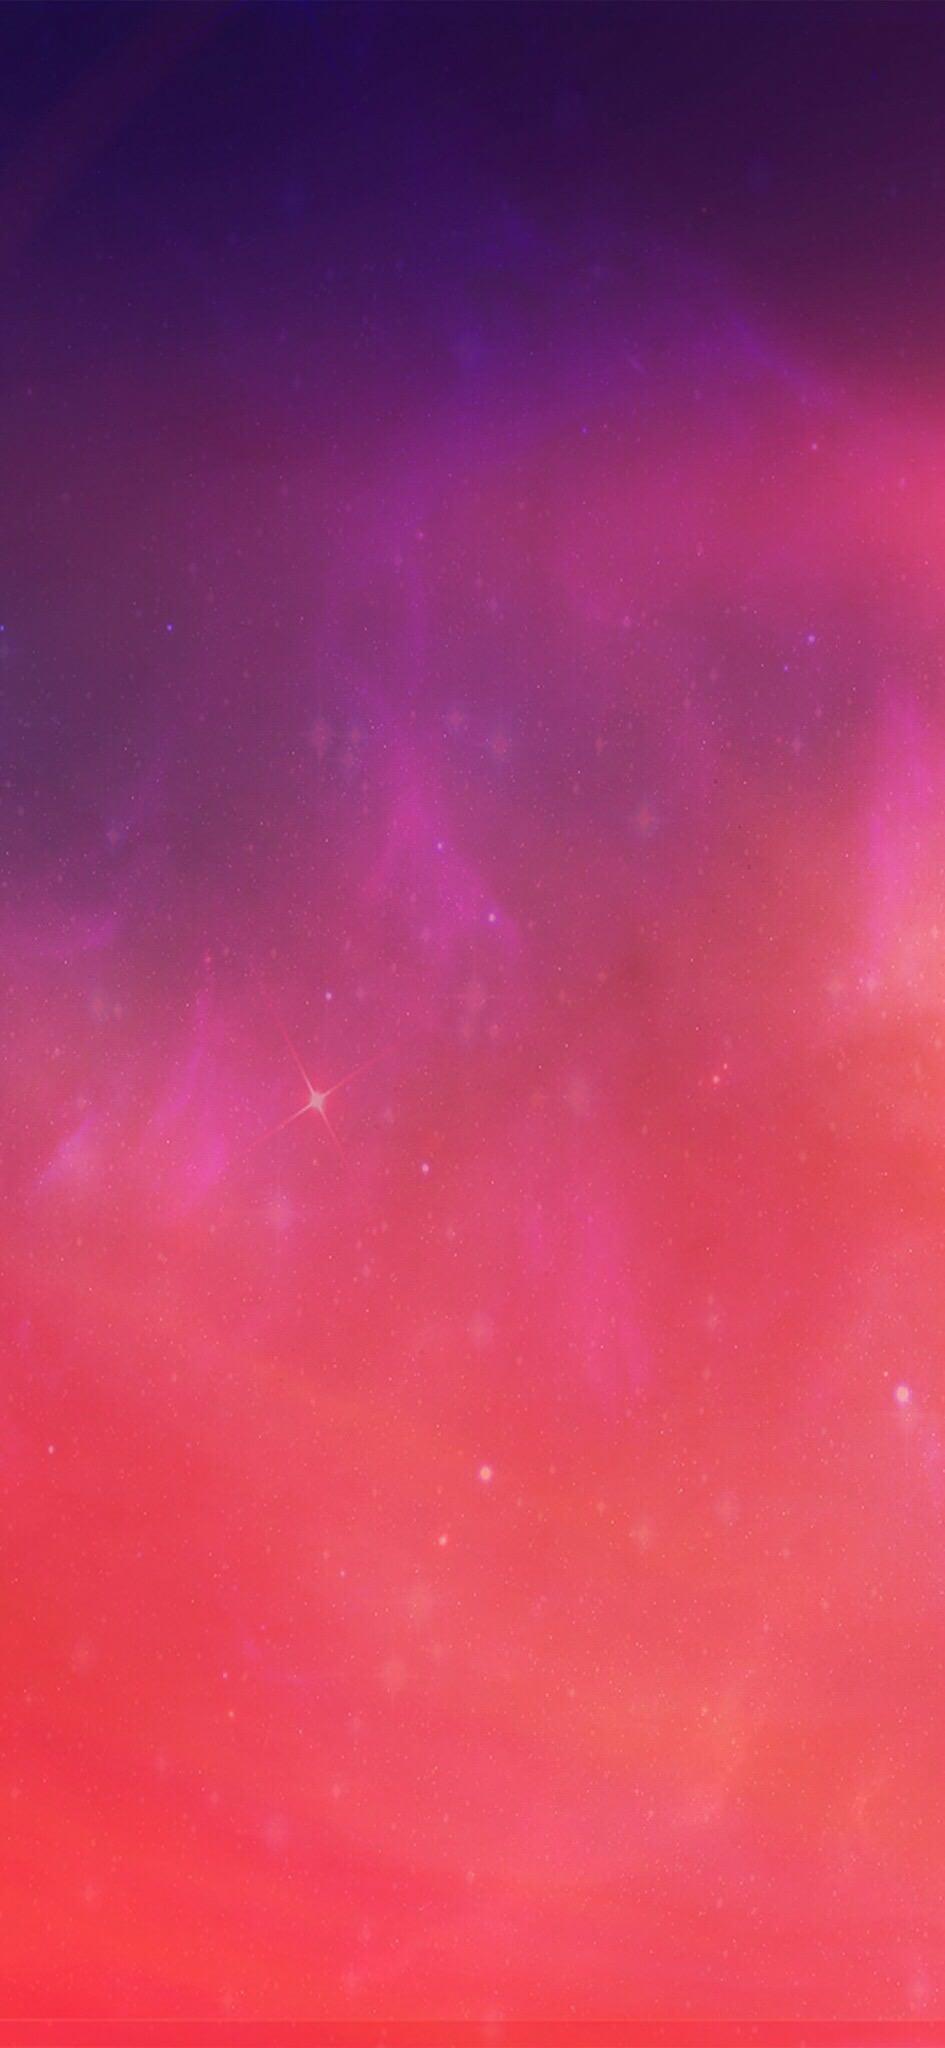 iOS 12 Wallpapers - Wallpaper Cave